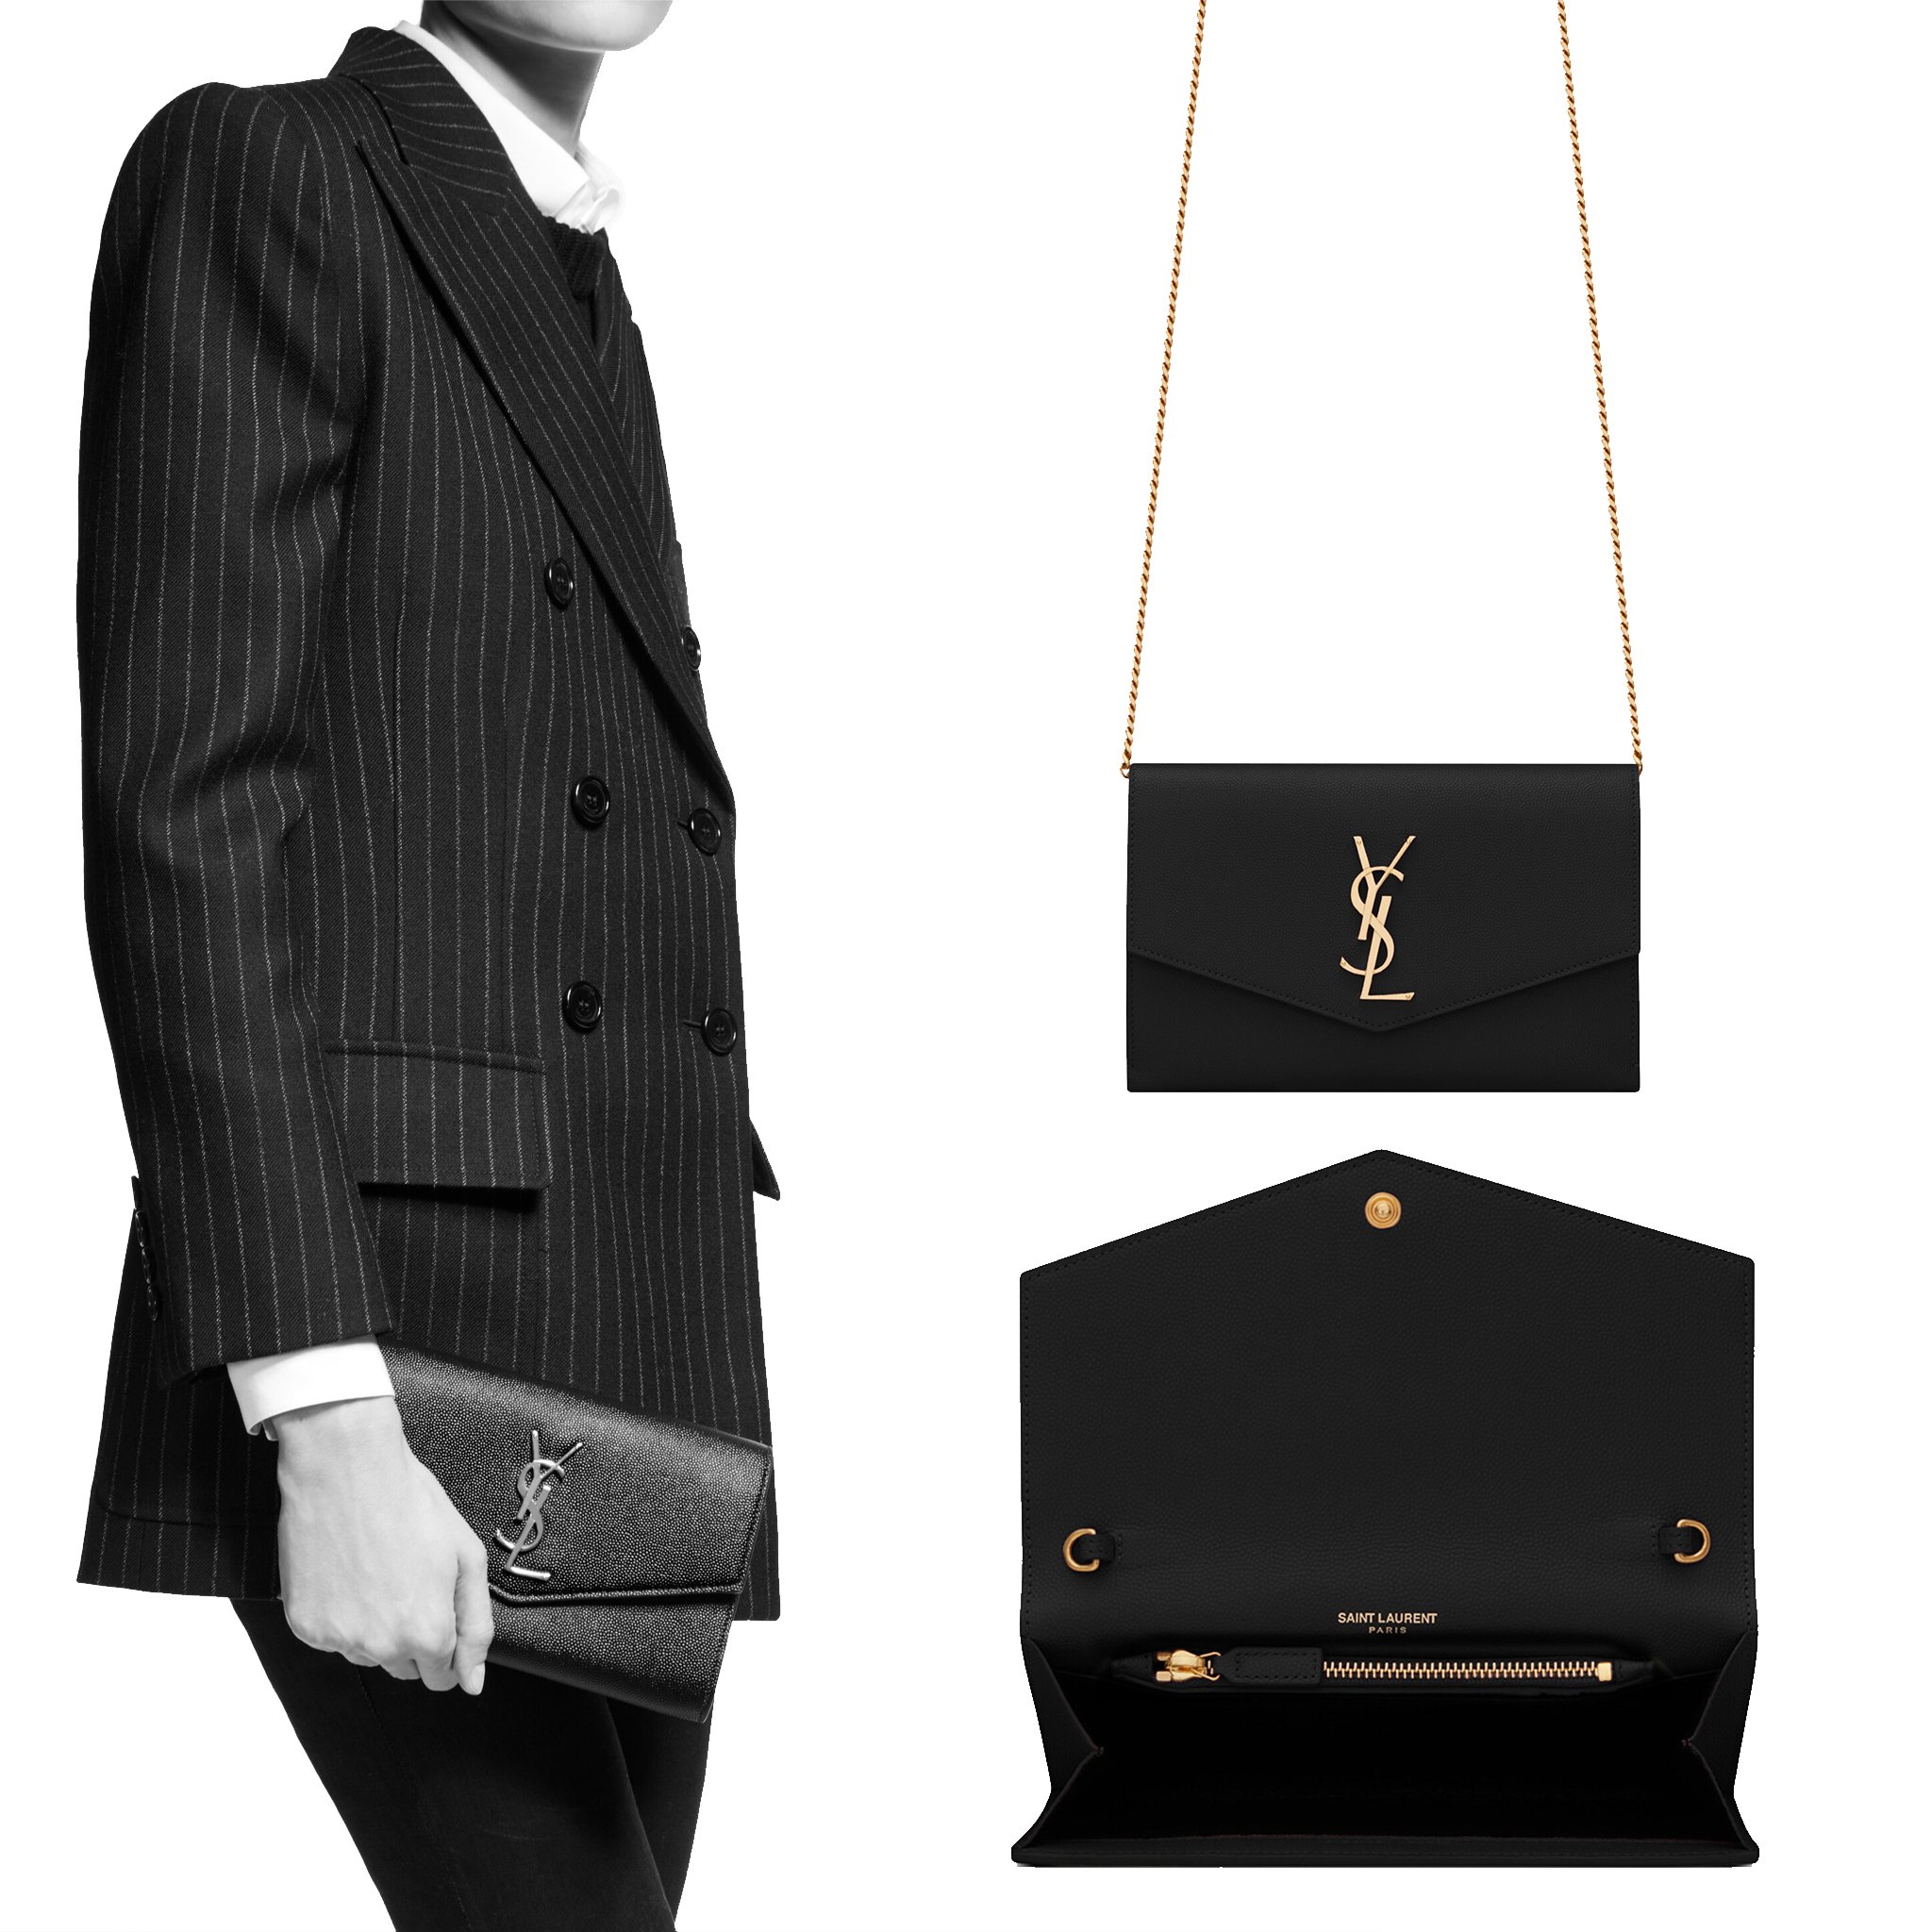 A wallet-on-chain bag, the Uptown is a mini envelop bag with YSL initials and a removable chain shoulder strap